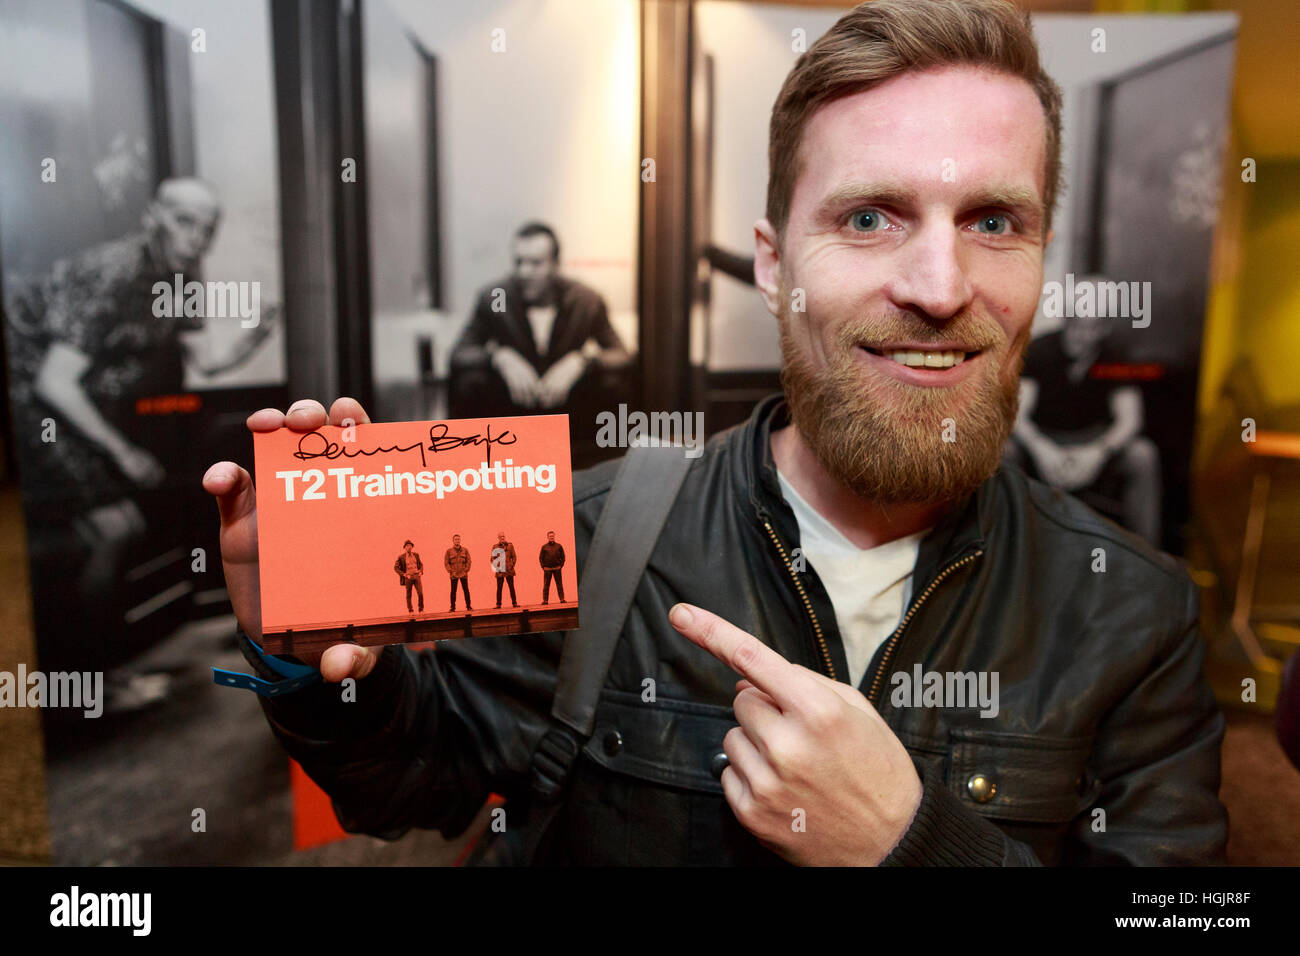 Edinburgh, UK. 22nd January, 2017. T2 Trainspotting premiere at Edinburgh Cineworld. Scotland. Pictured Kenny MacGregor member of the audience showing the T2 ticket signed by Danny Boyle.  Pako Mera/Alamy live News Stock Photo